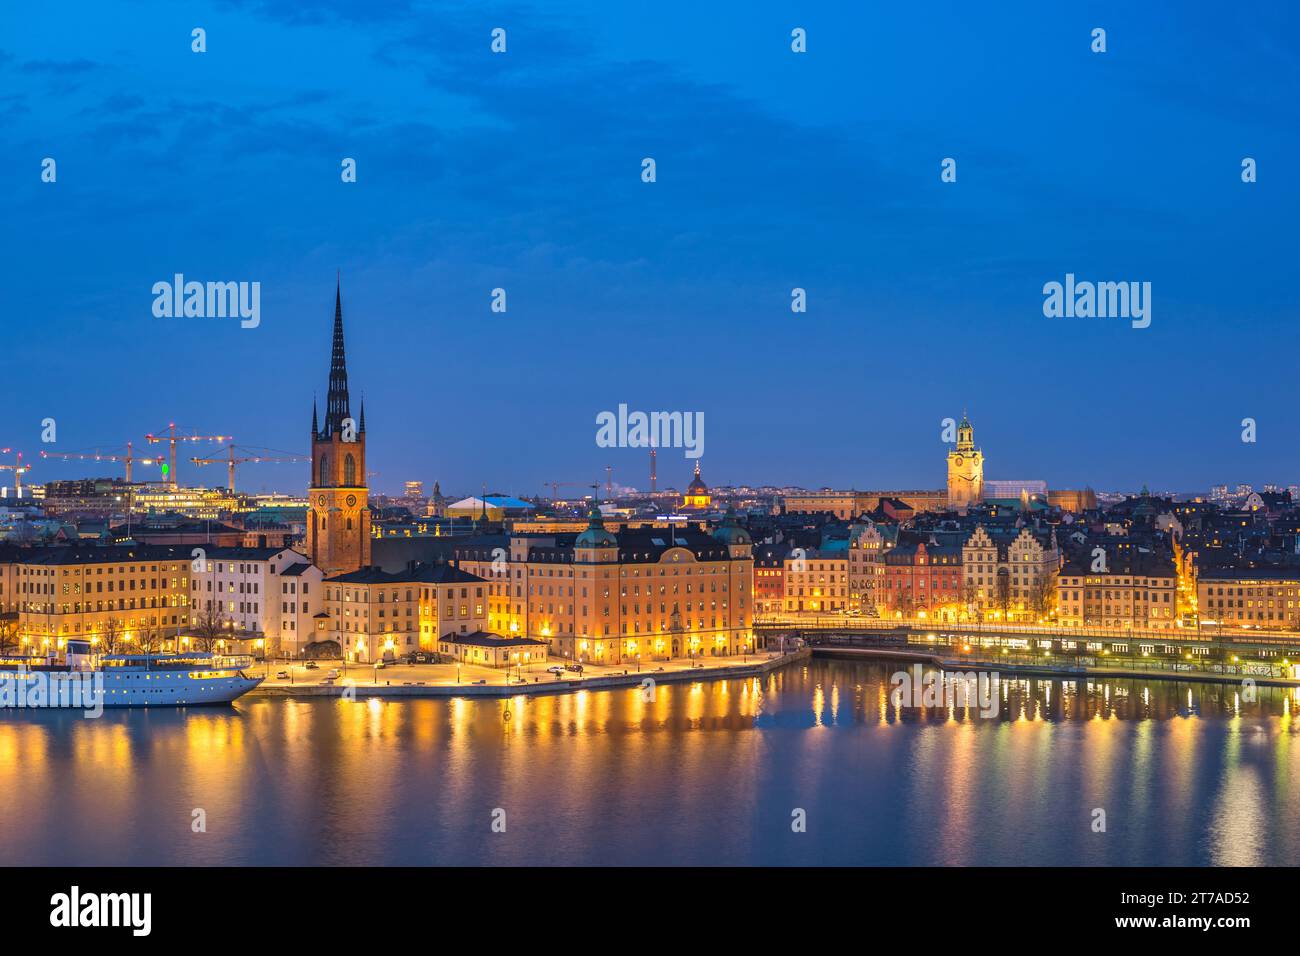 Stockholm Sweden, night city skyline at Gamla Stan old town Stock Photo